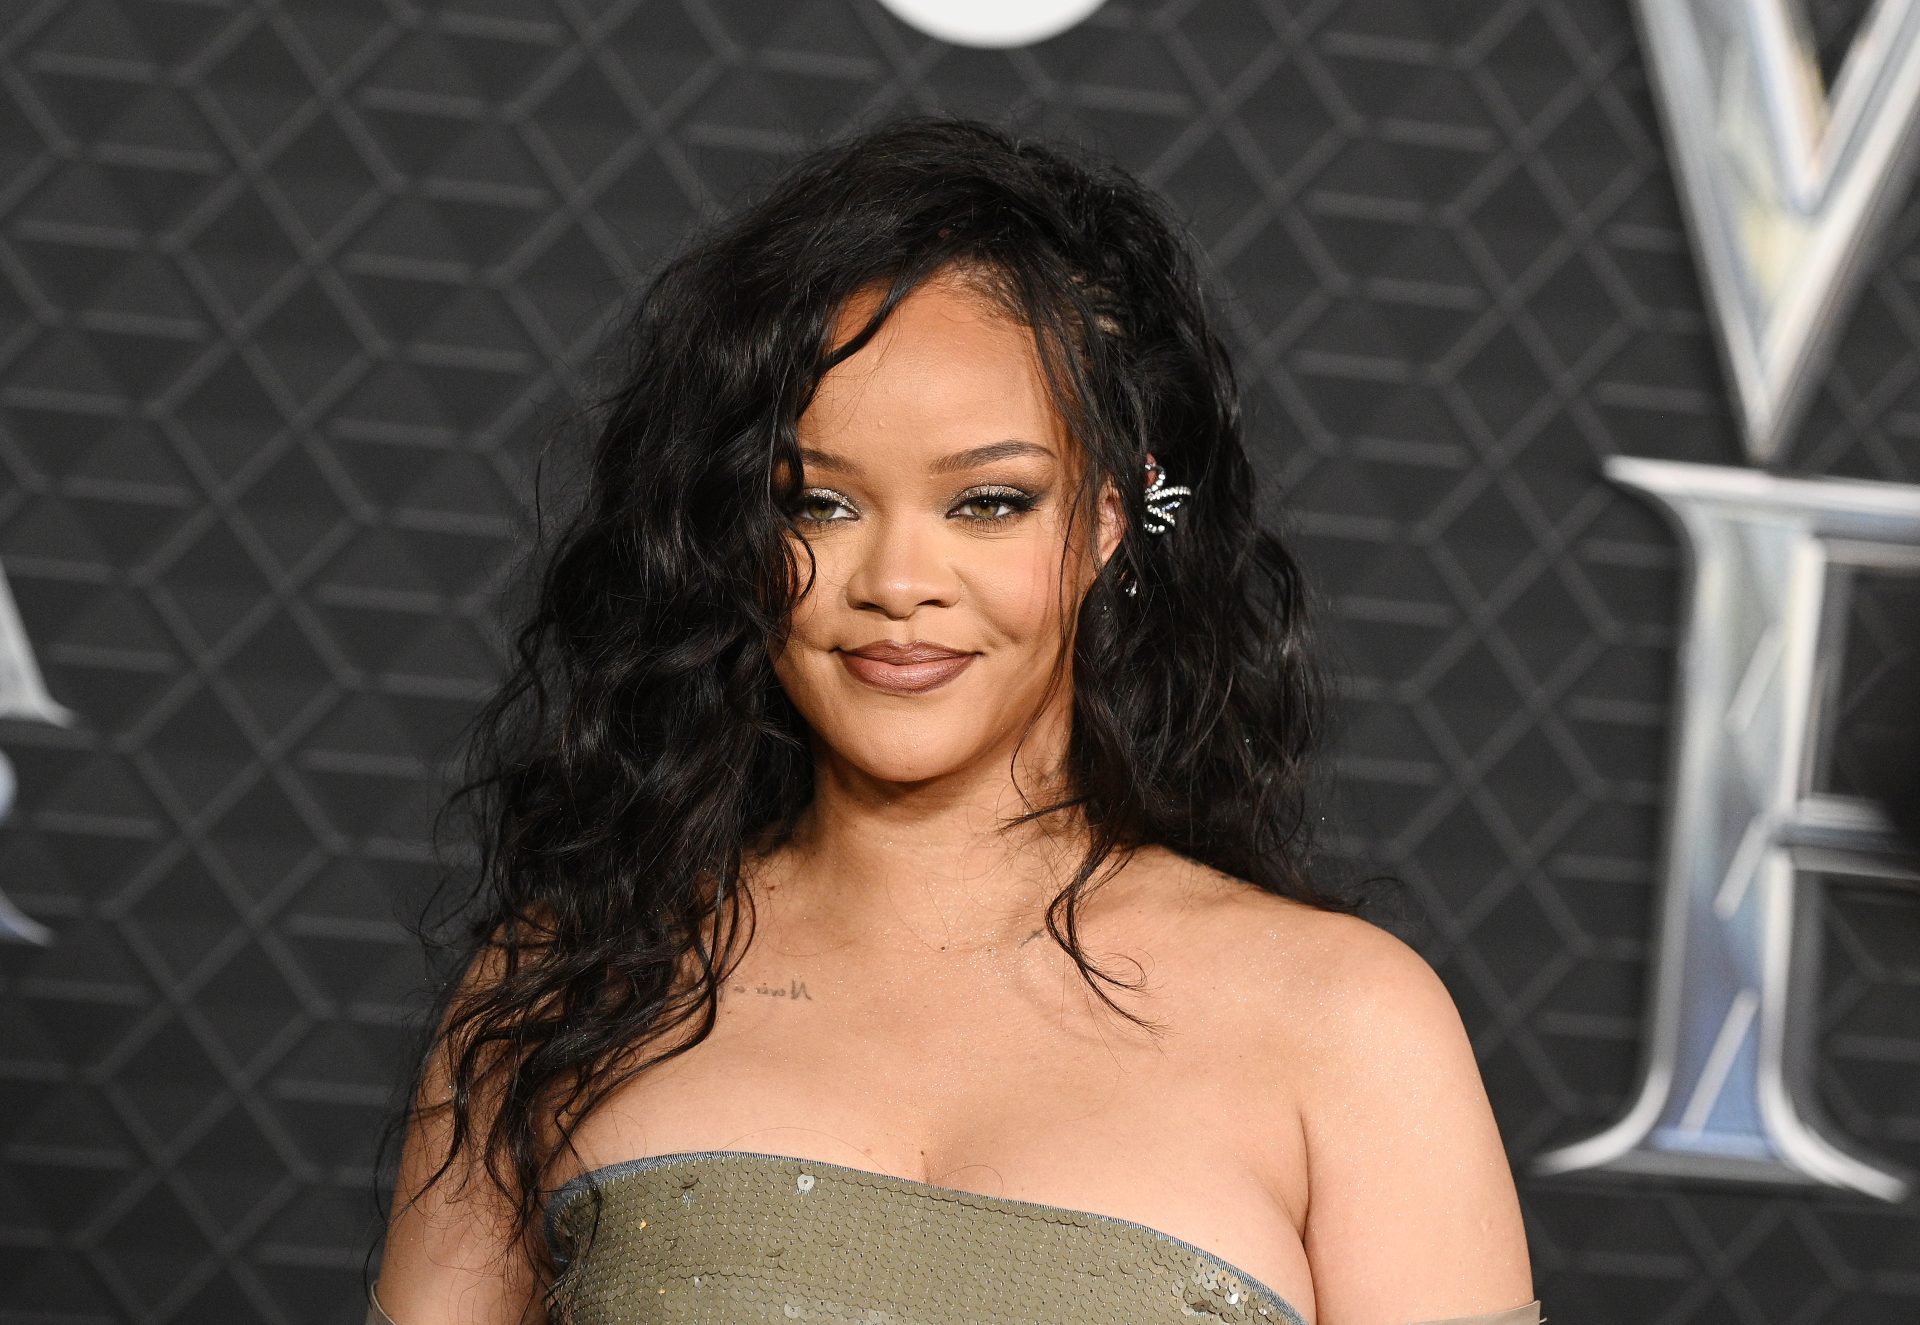 Rihanna Opens Up About “Amazing Experience” Of Motherhood That First Felt Like “Tripping On Acid”